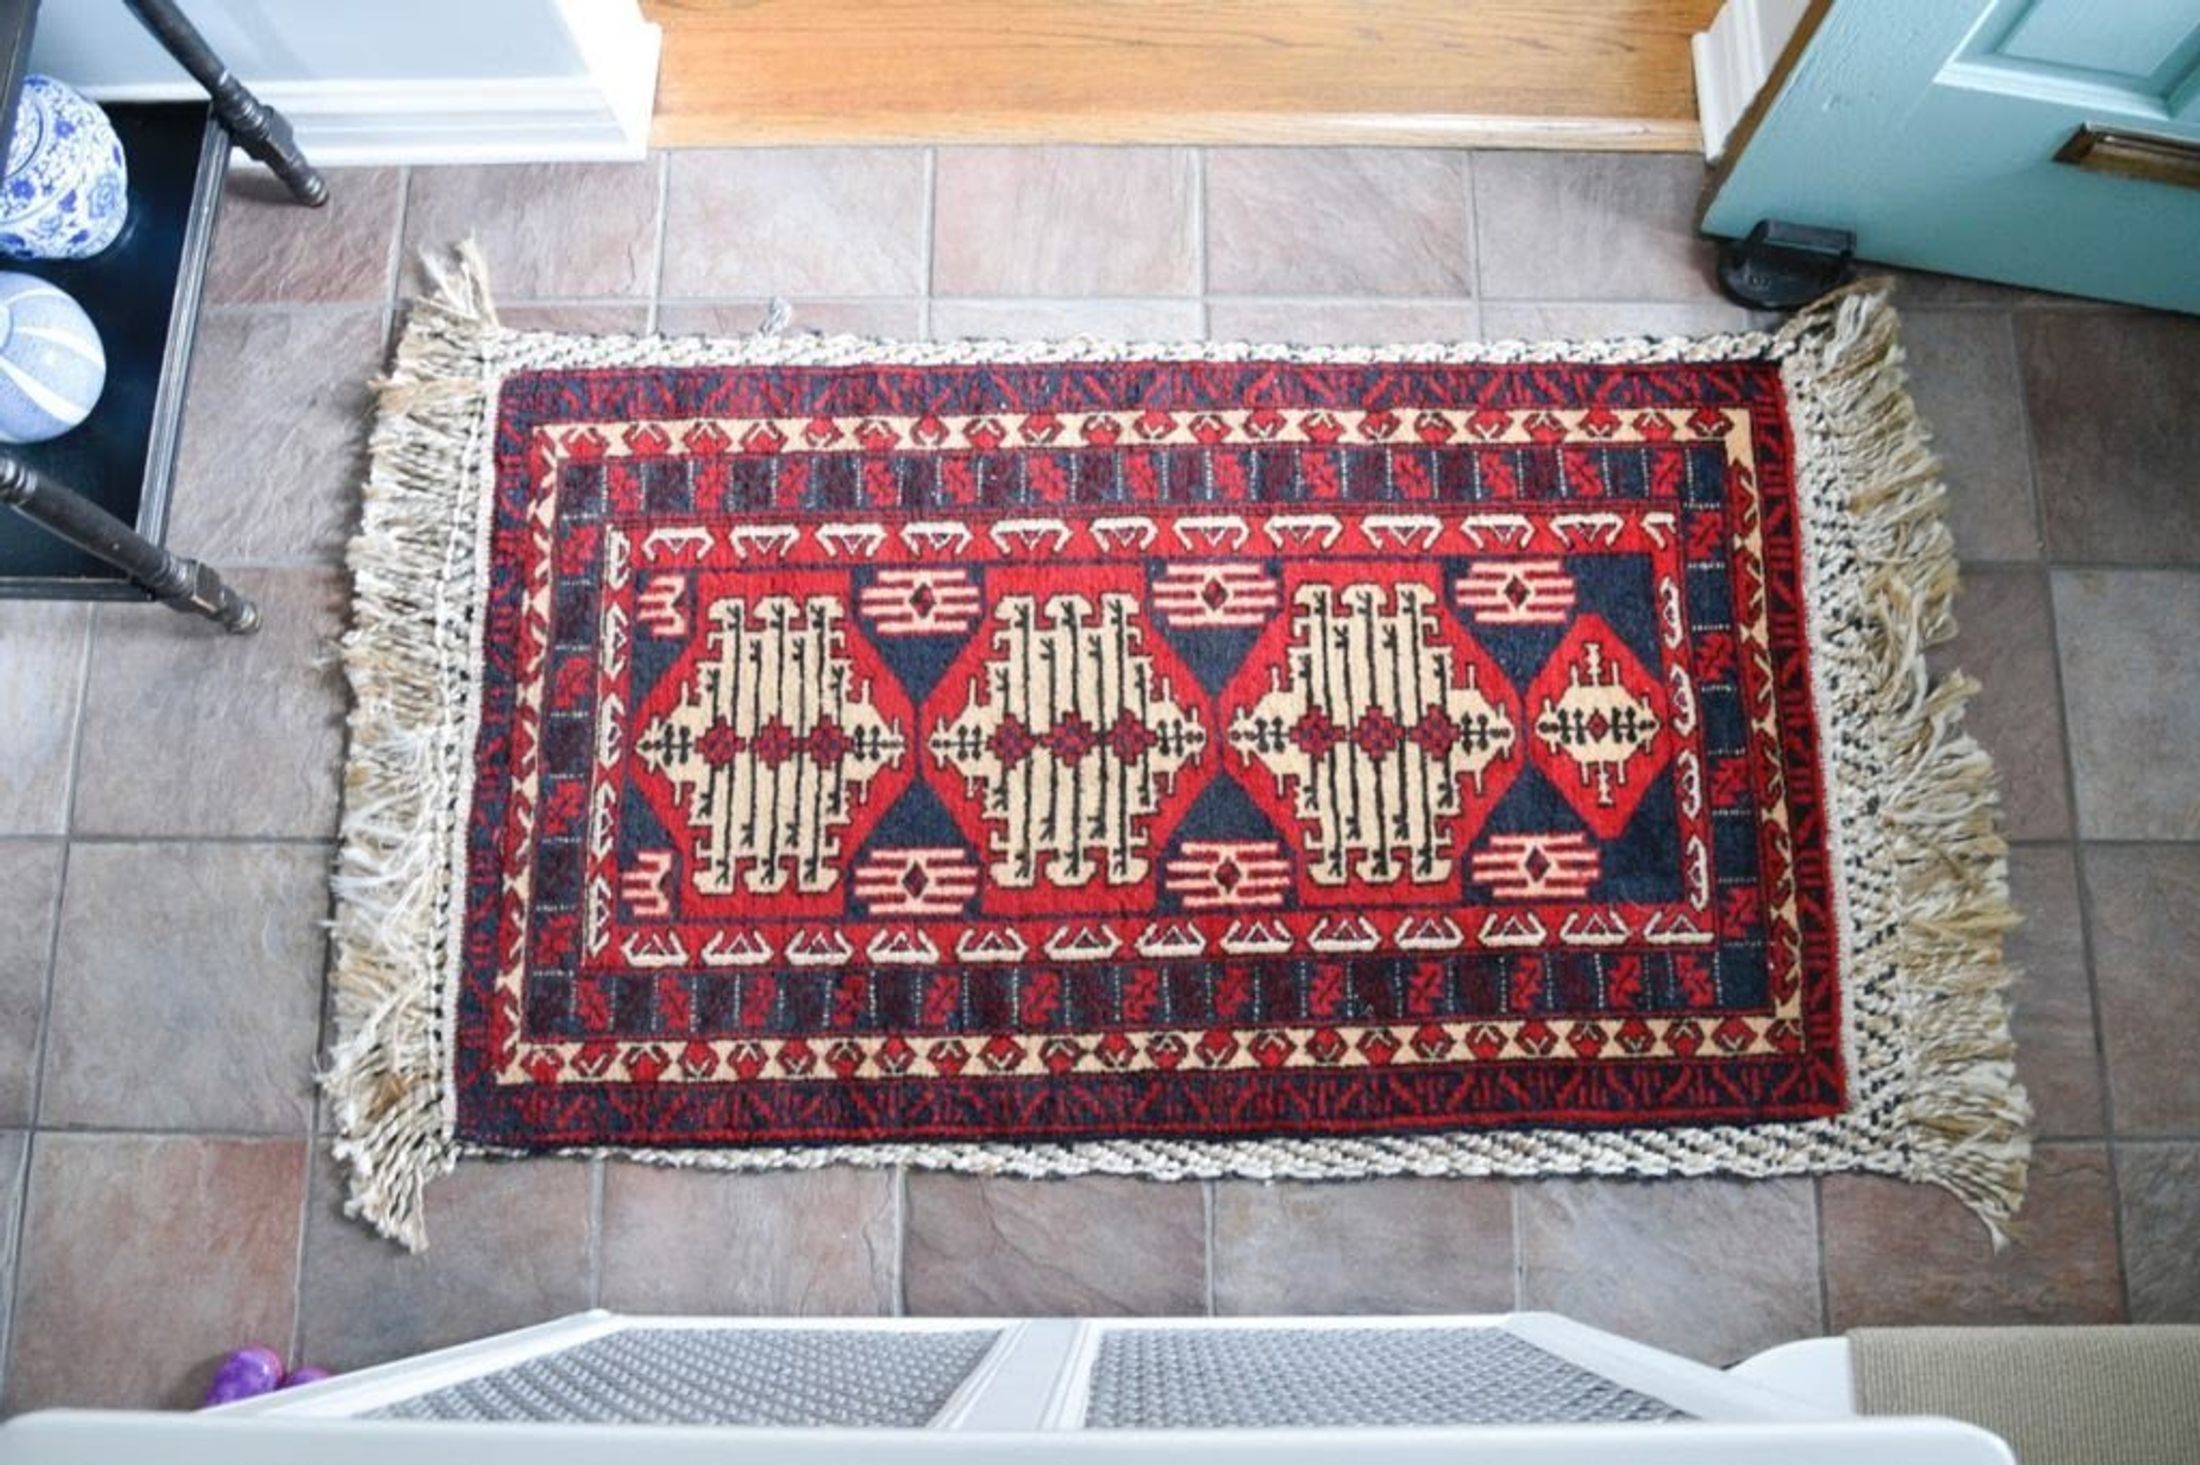 How to Keep Rugs from Slipping on Carpet: 4 Simple Solutions